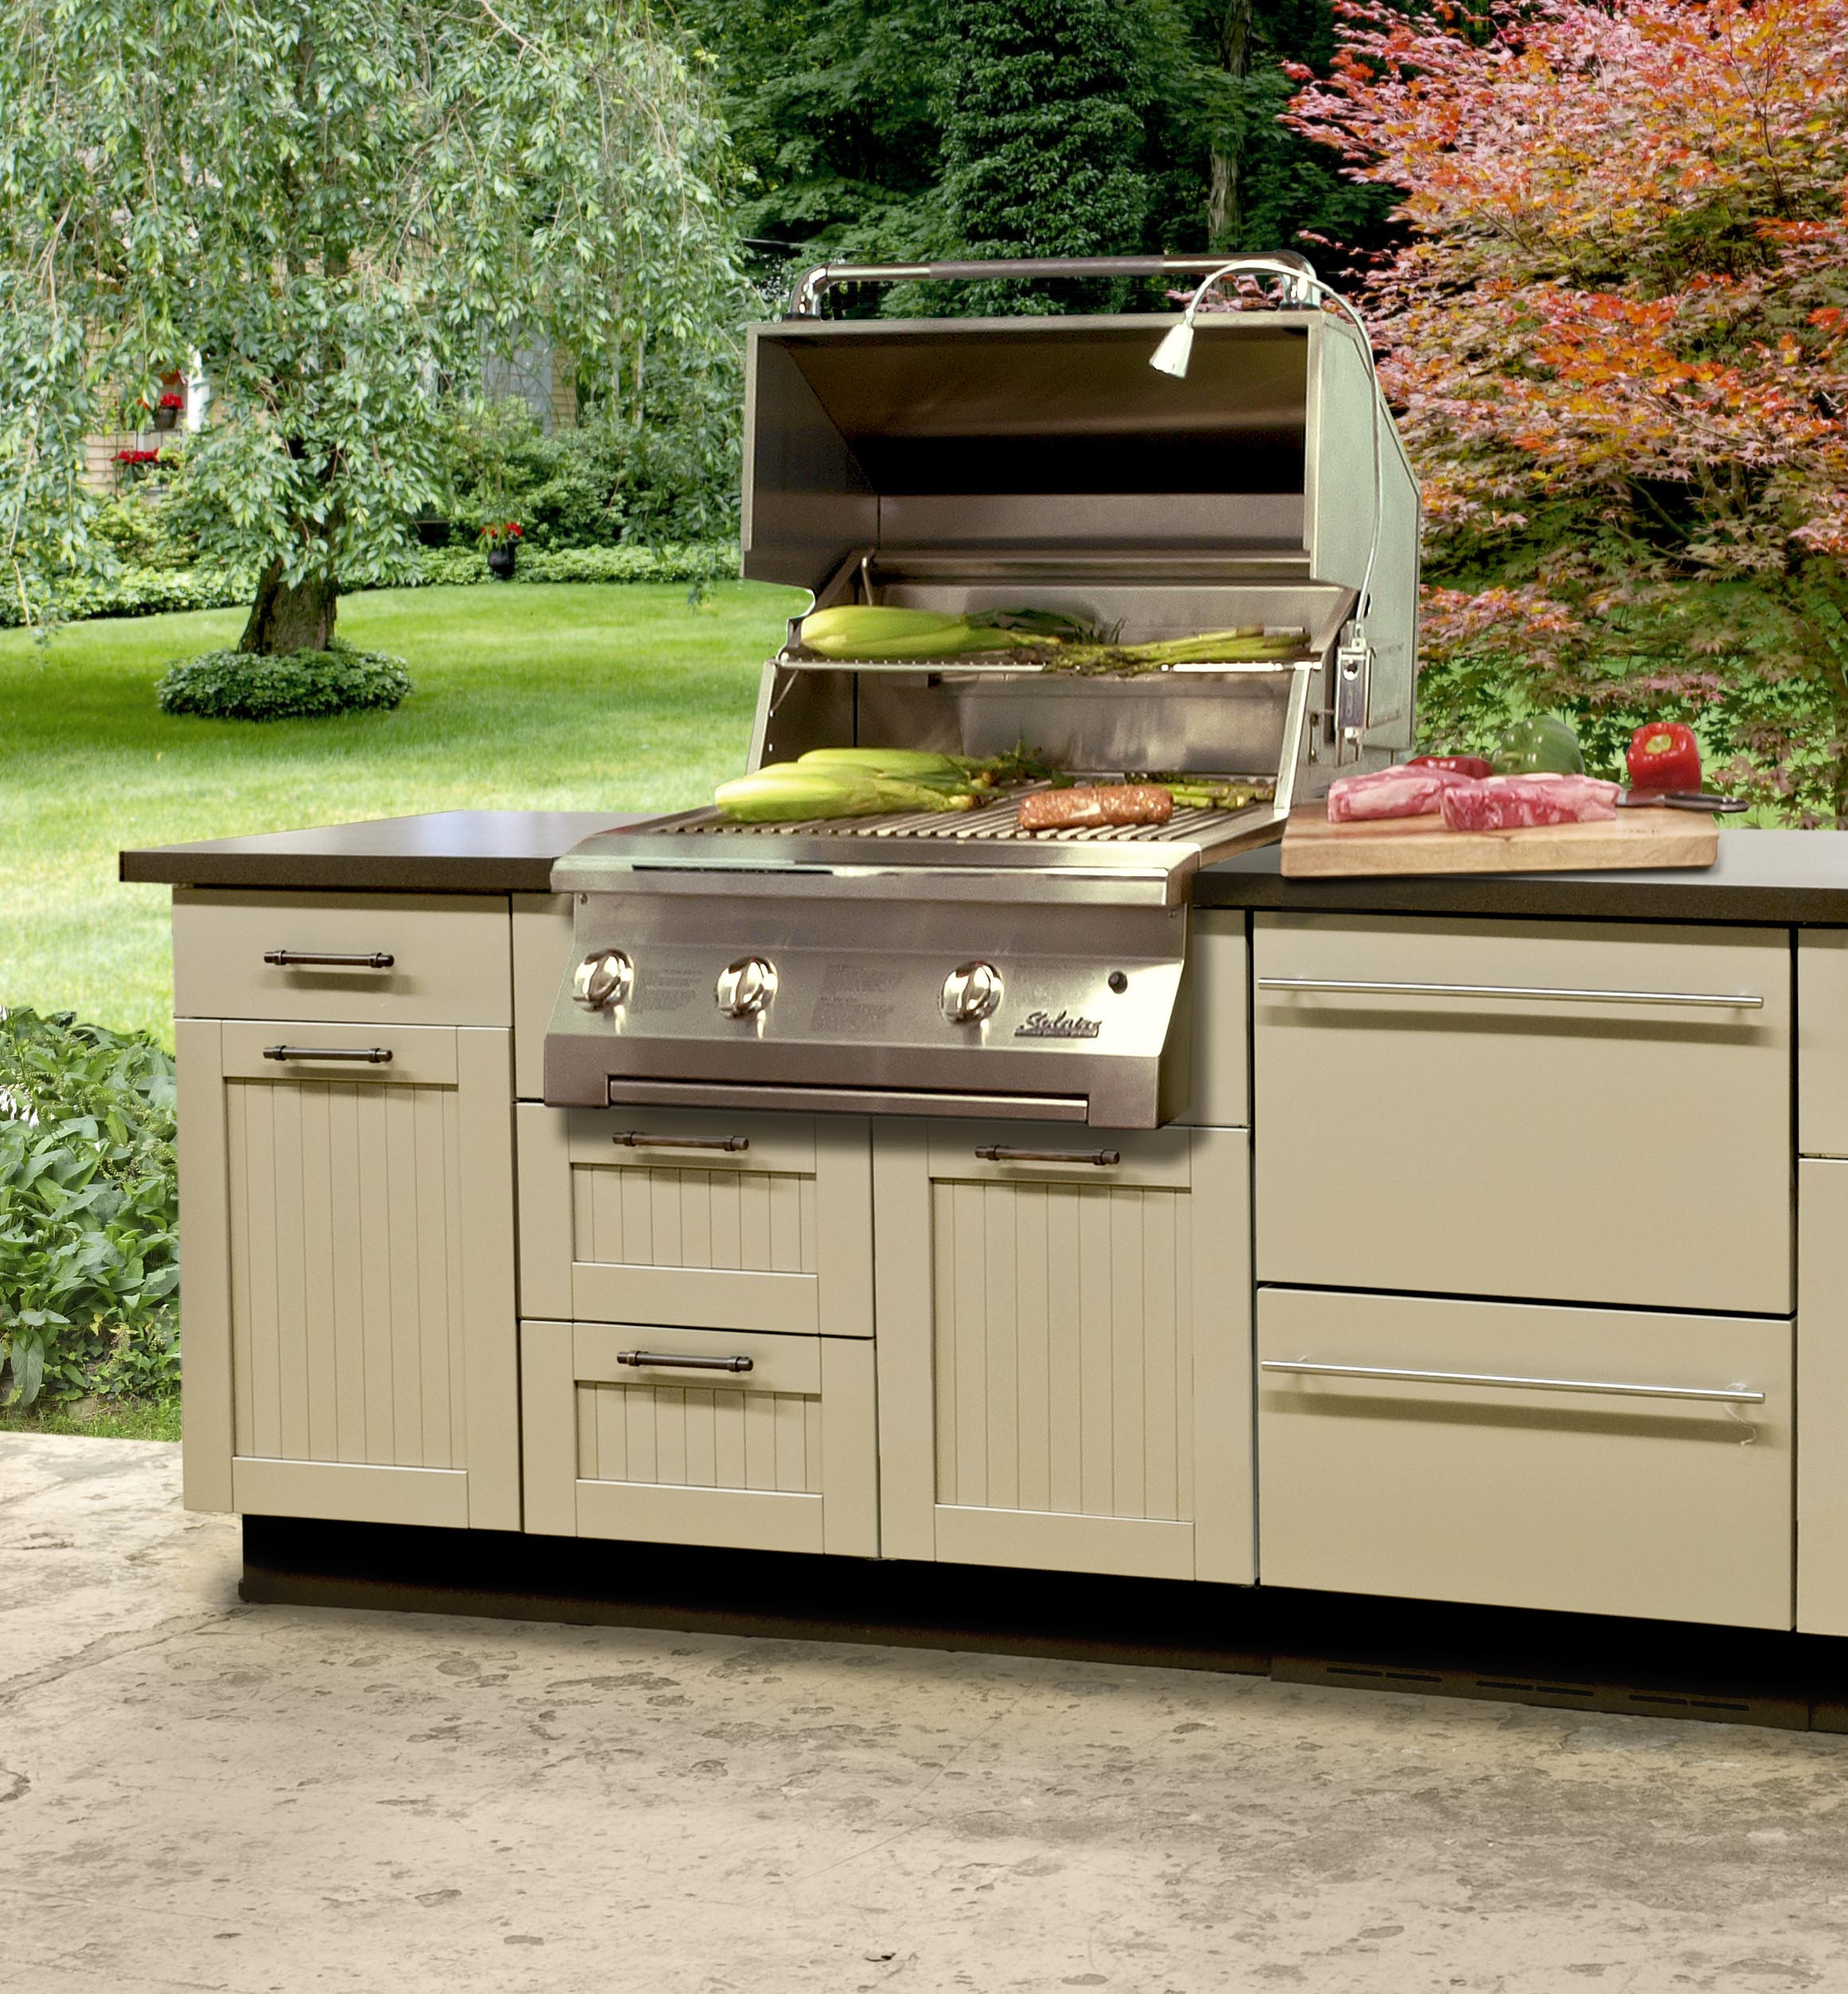 Stainless Outdoor Kitchen
 Danver Stainless Steel Cabinetry